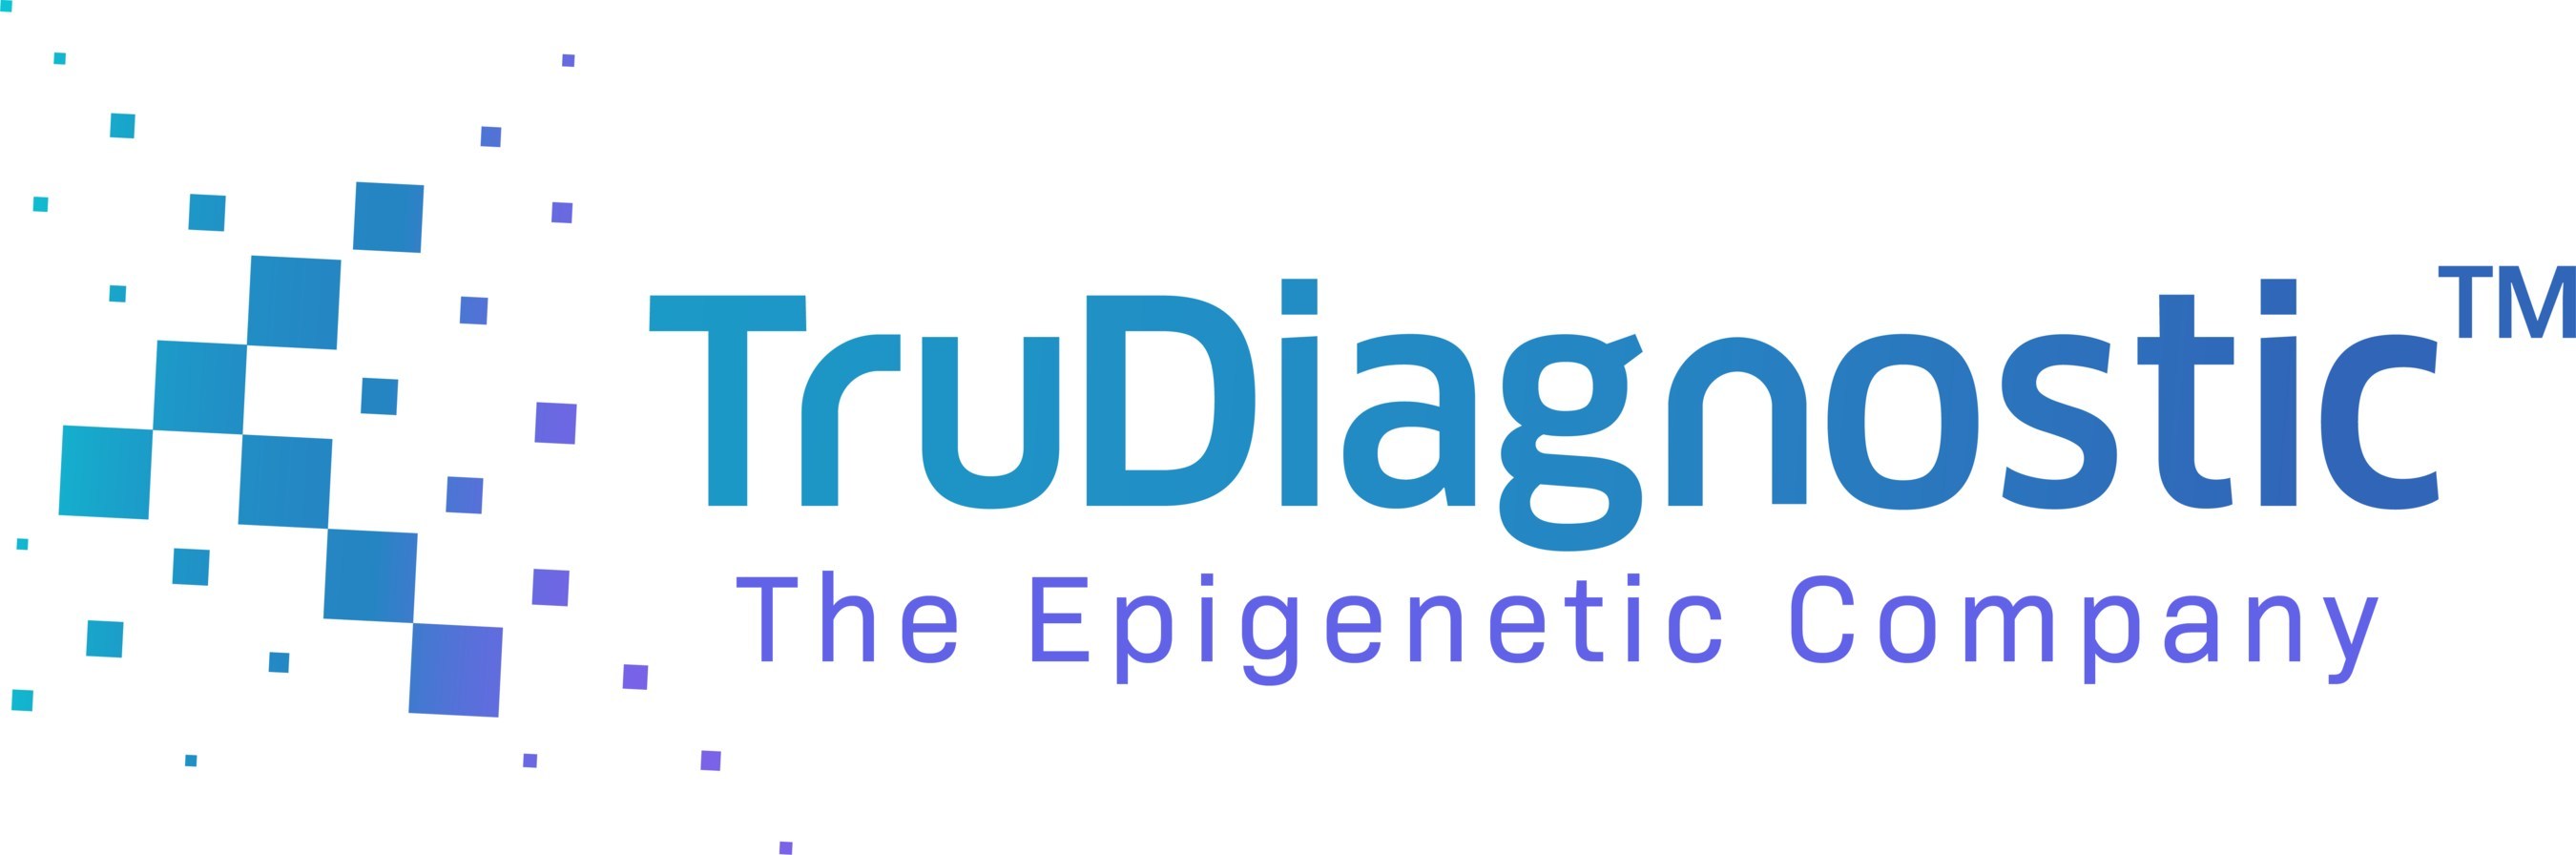 TruDiagnostic is a leading health data company with a focus on multi omics and insights gained from the fluid epigenome. Established in early 2020, after development and build out of its 10,000 sq ft state of the art laboratory with Illumina equipment and consultation it launched its first provider and patient test “TruAge”. Today, TruDiagnostic has built a premiere epigenetic database of DNA Methylation markers and covariates which is one of the largest in the world. (PRNewsfoto/TruDiagnostic)